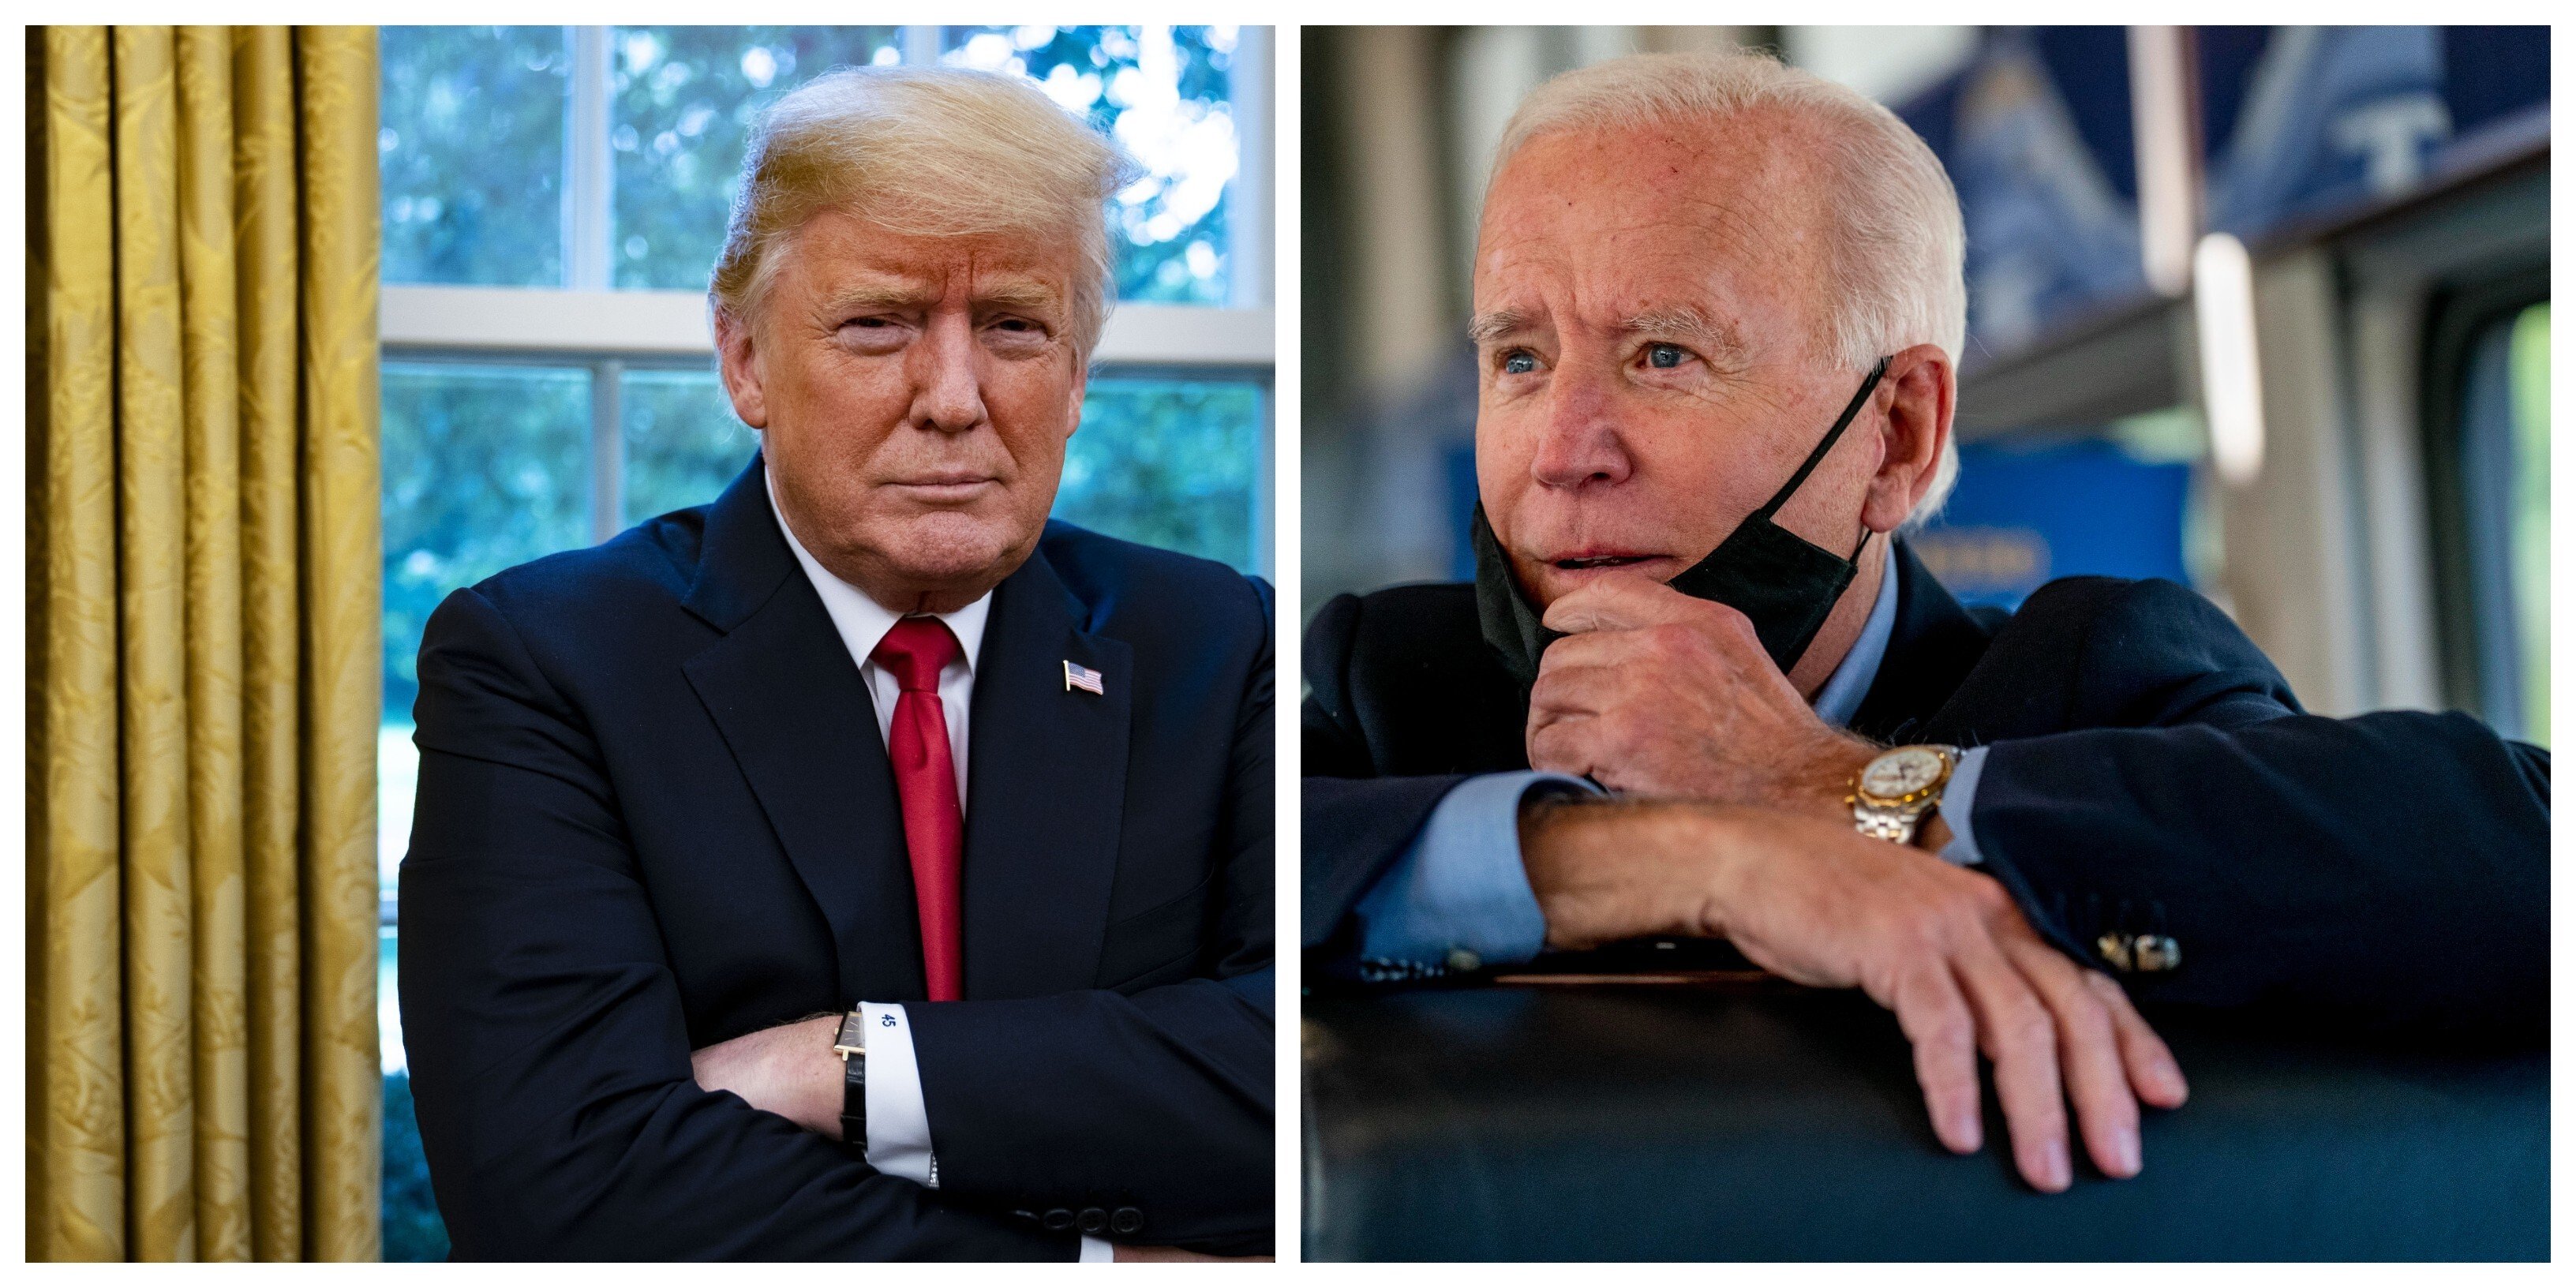 If there’s one thing Donald Trump and Joe Biden can agree on, it might just be their interest in timepieces. Photos: SCMP Archives